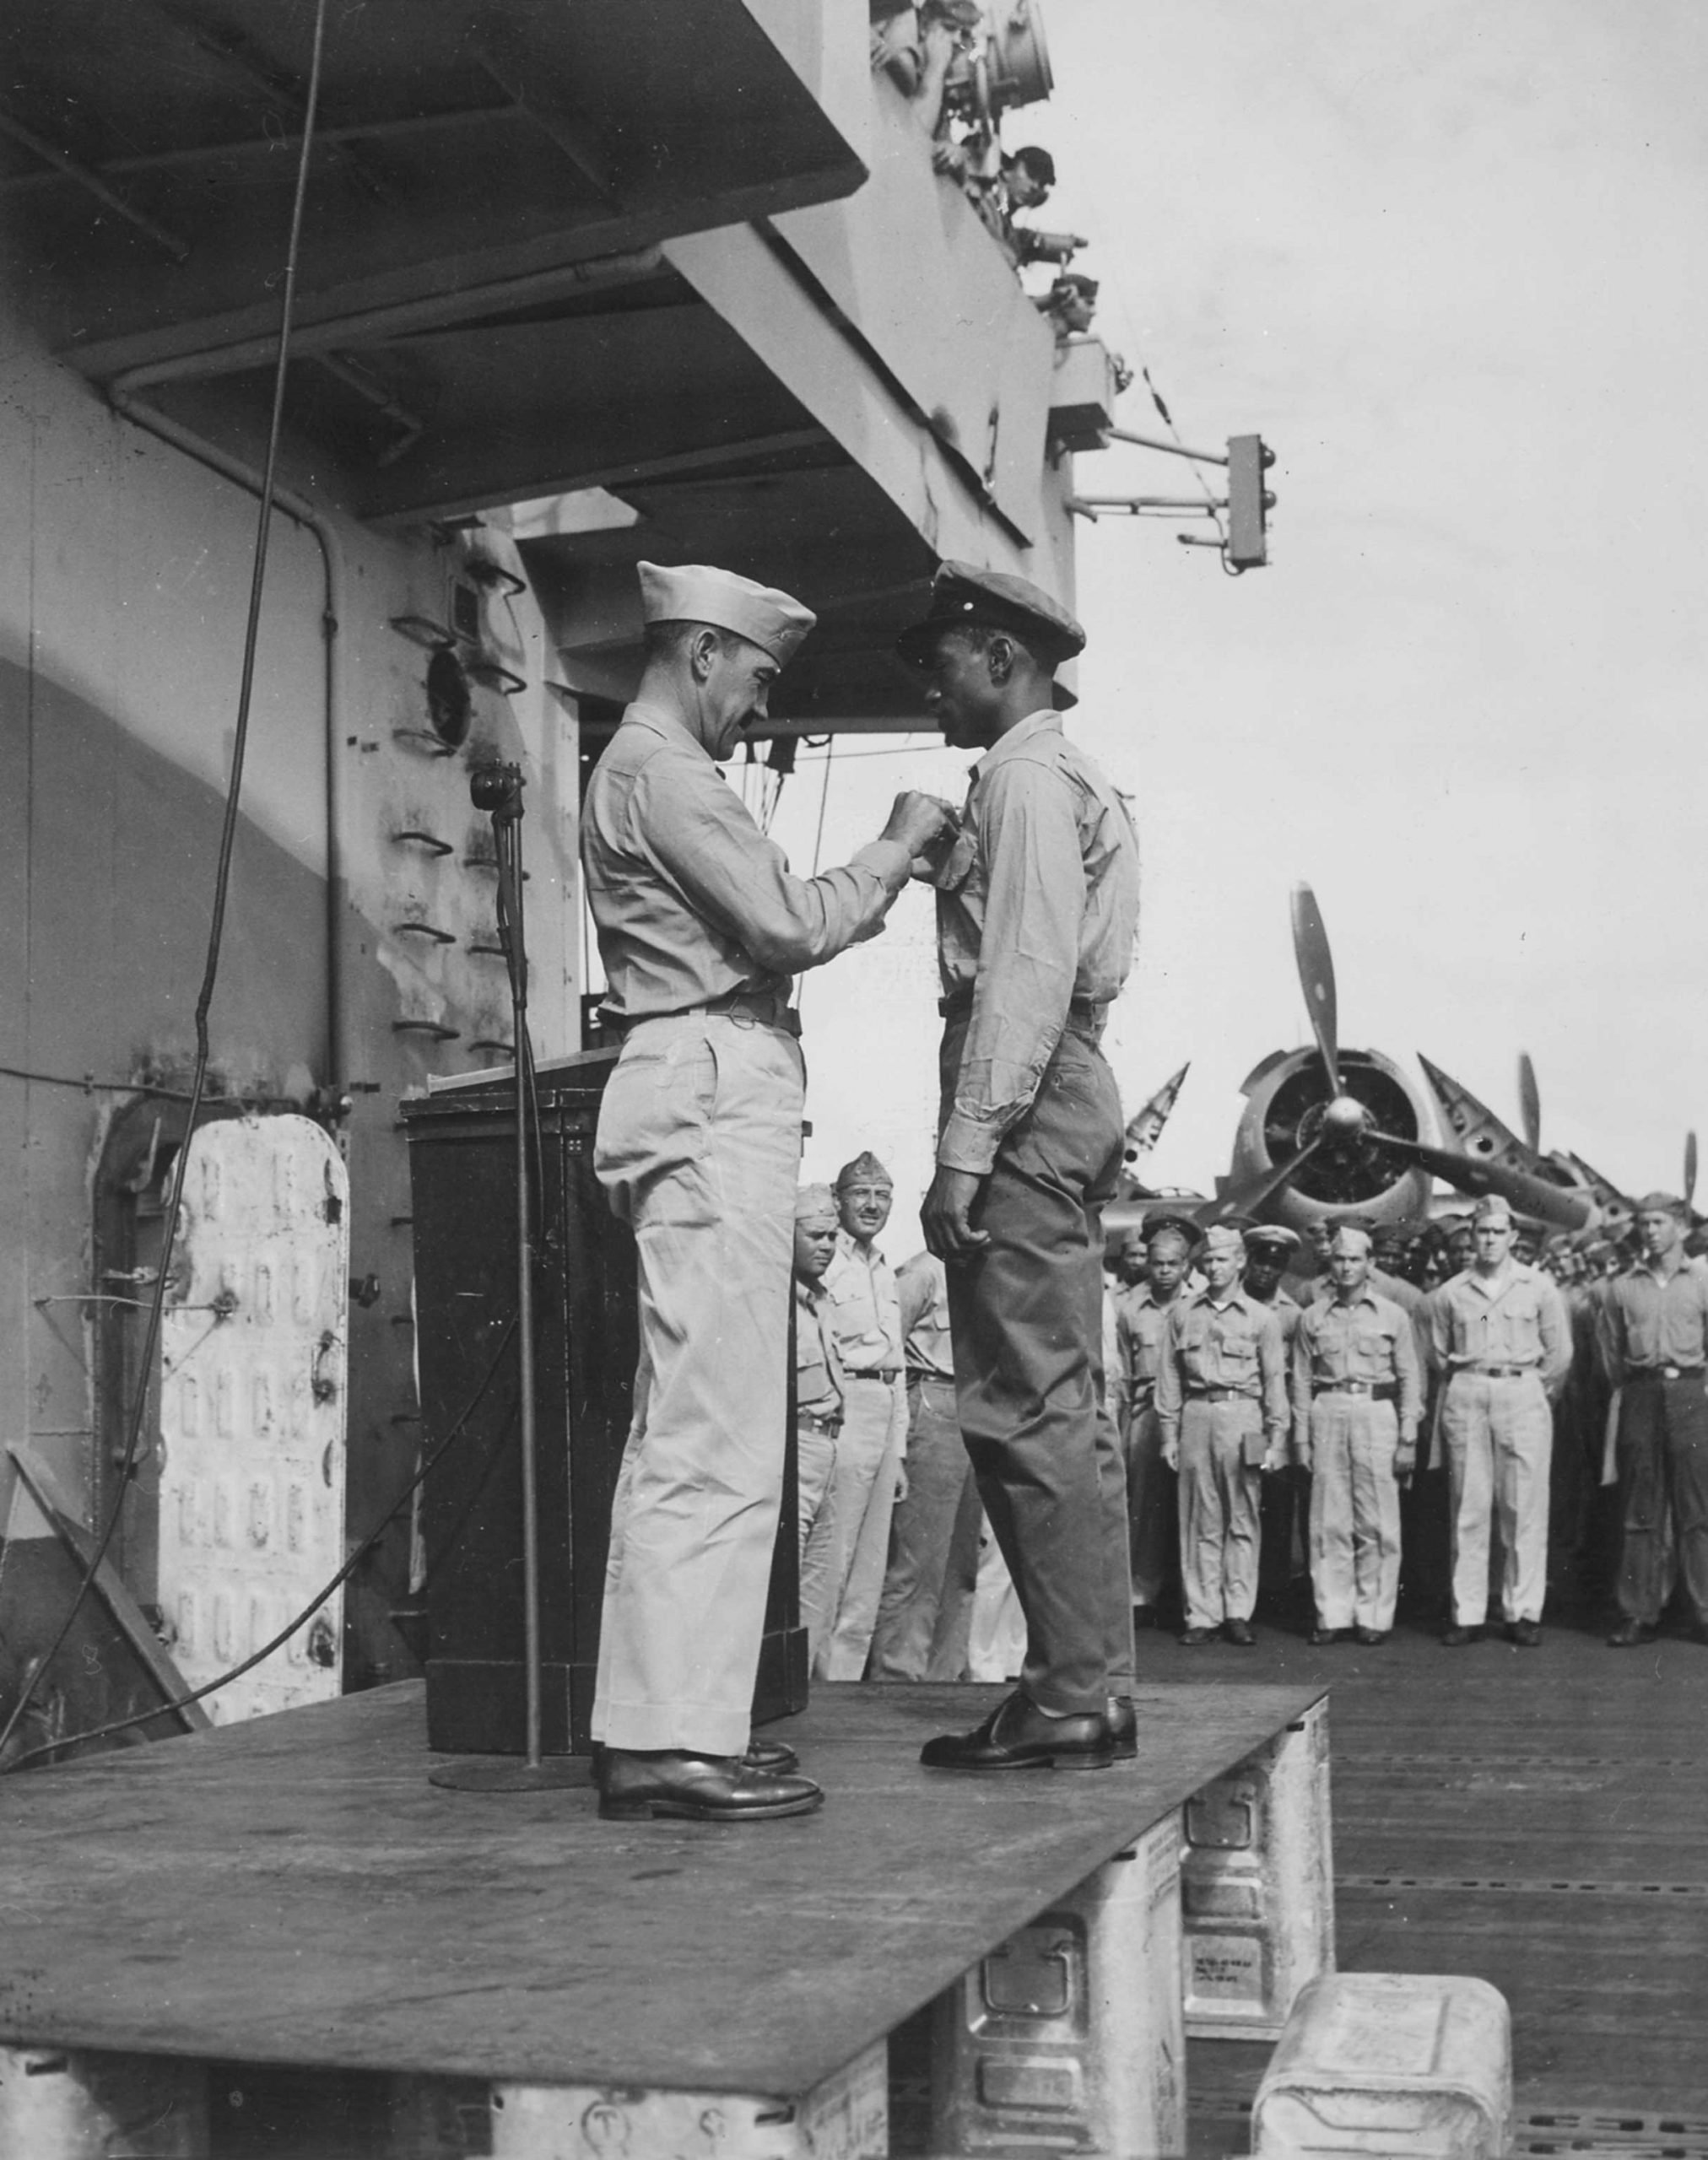 Awarding ceremony for sailor Fred Magee